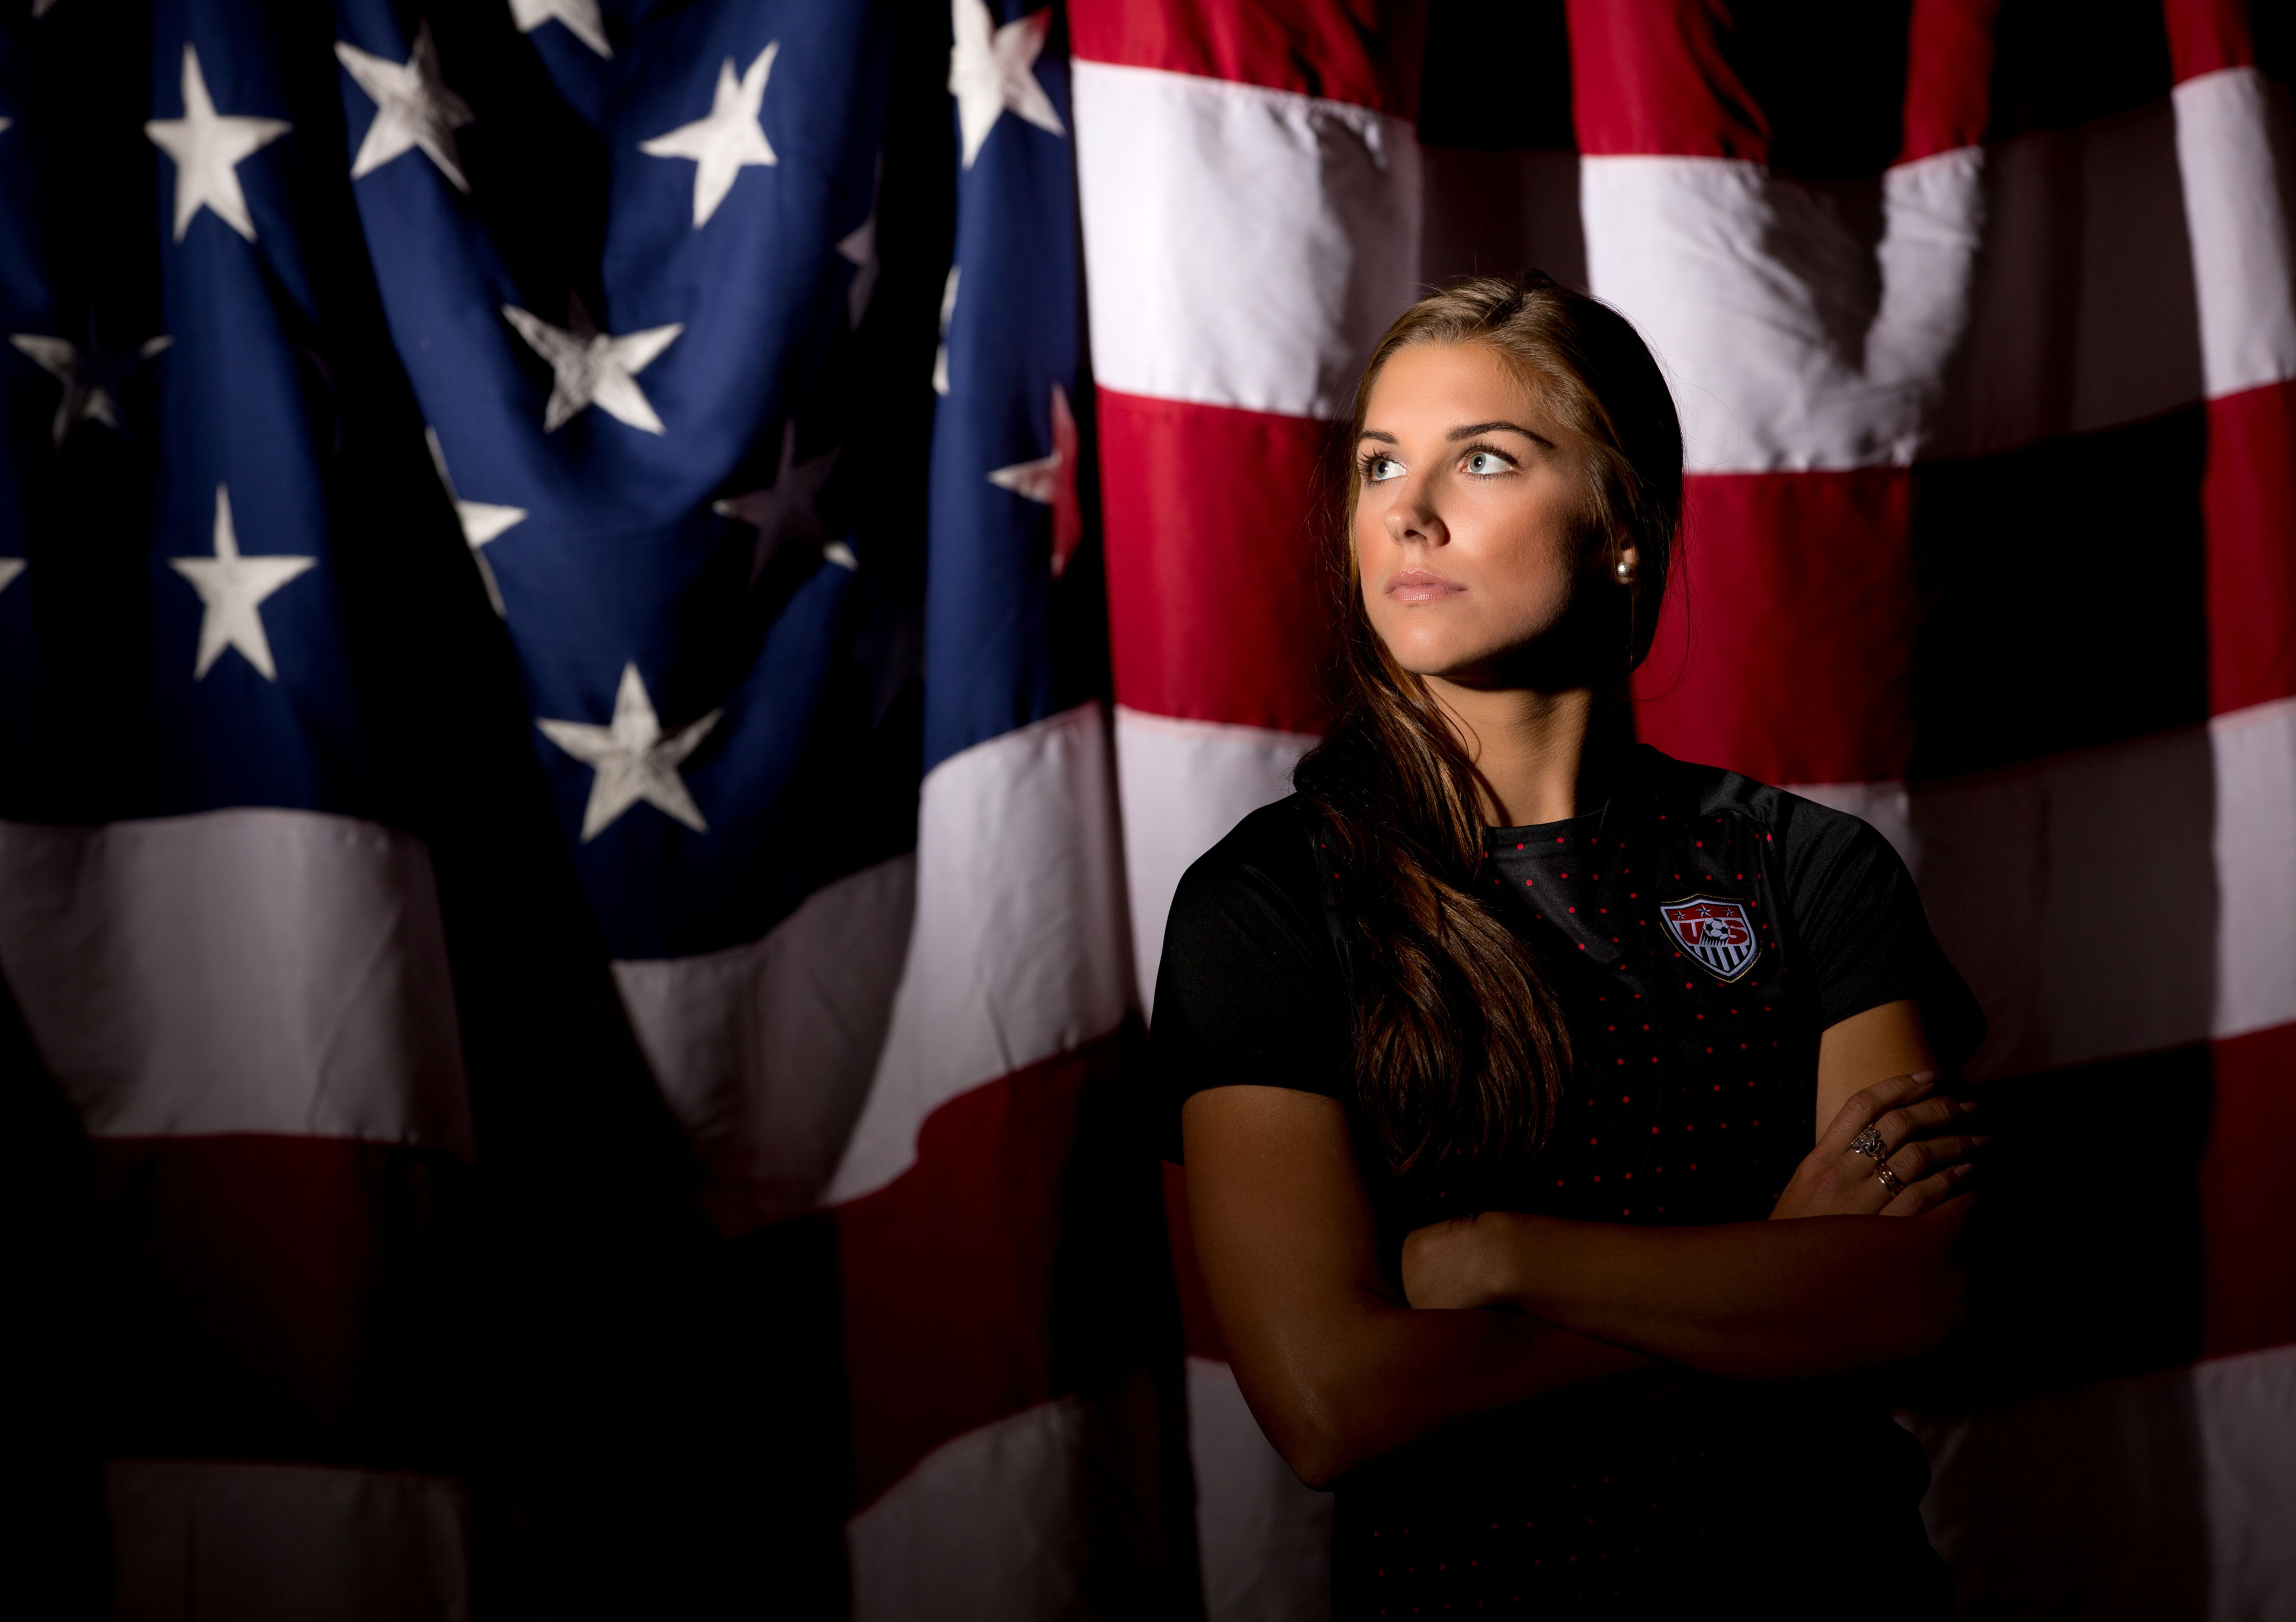 If you think we do intentionally put Alex Morgan's pictures up as often as possible, you would be right.